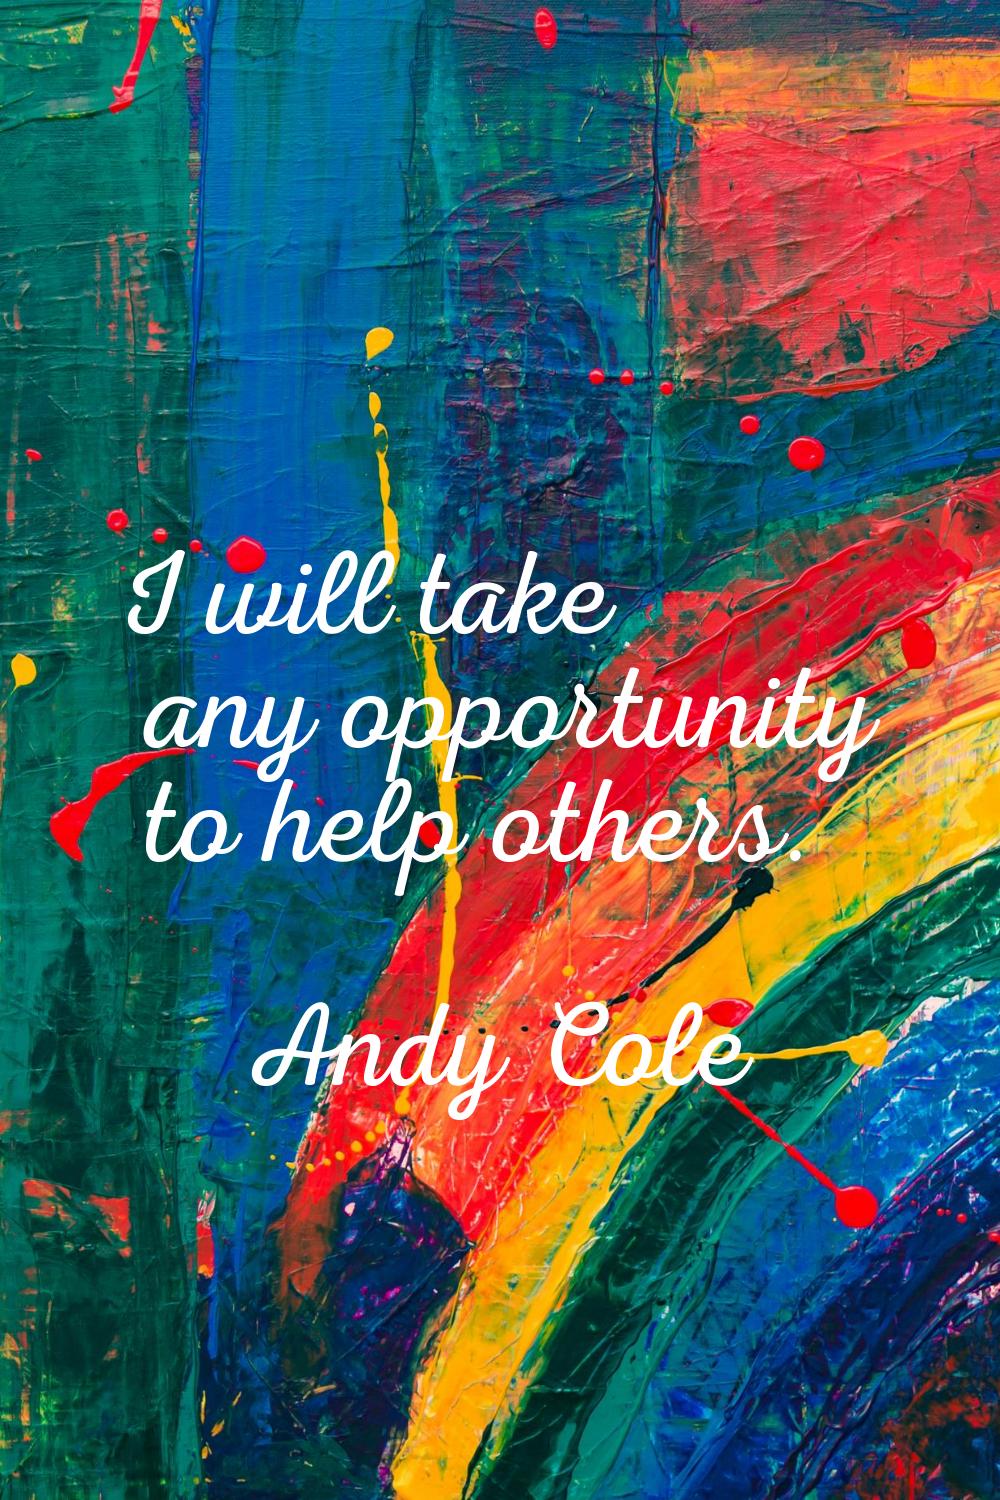 I will take any opportunity to help others.